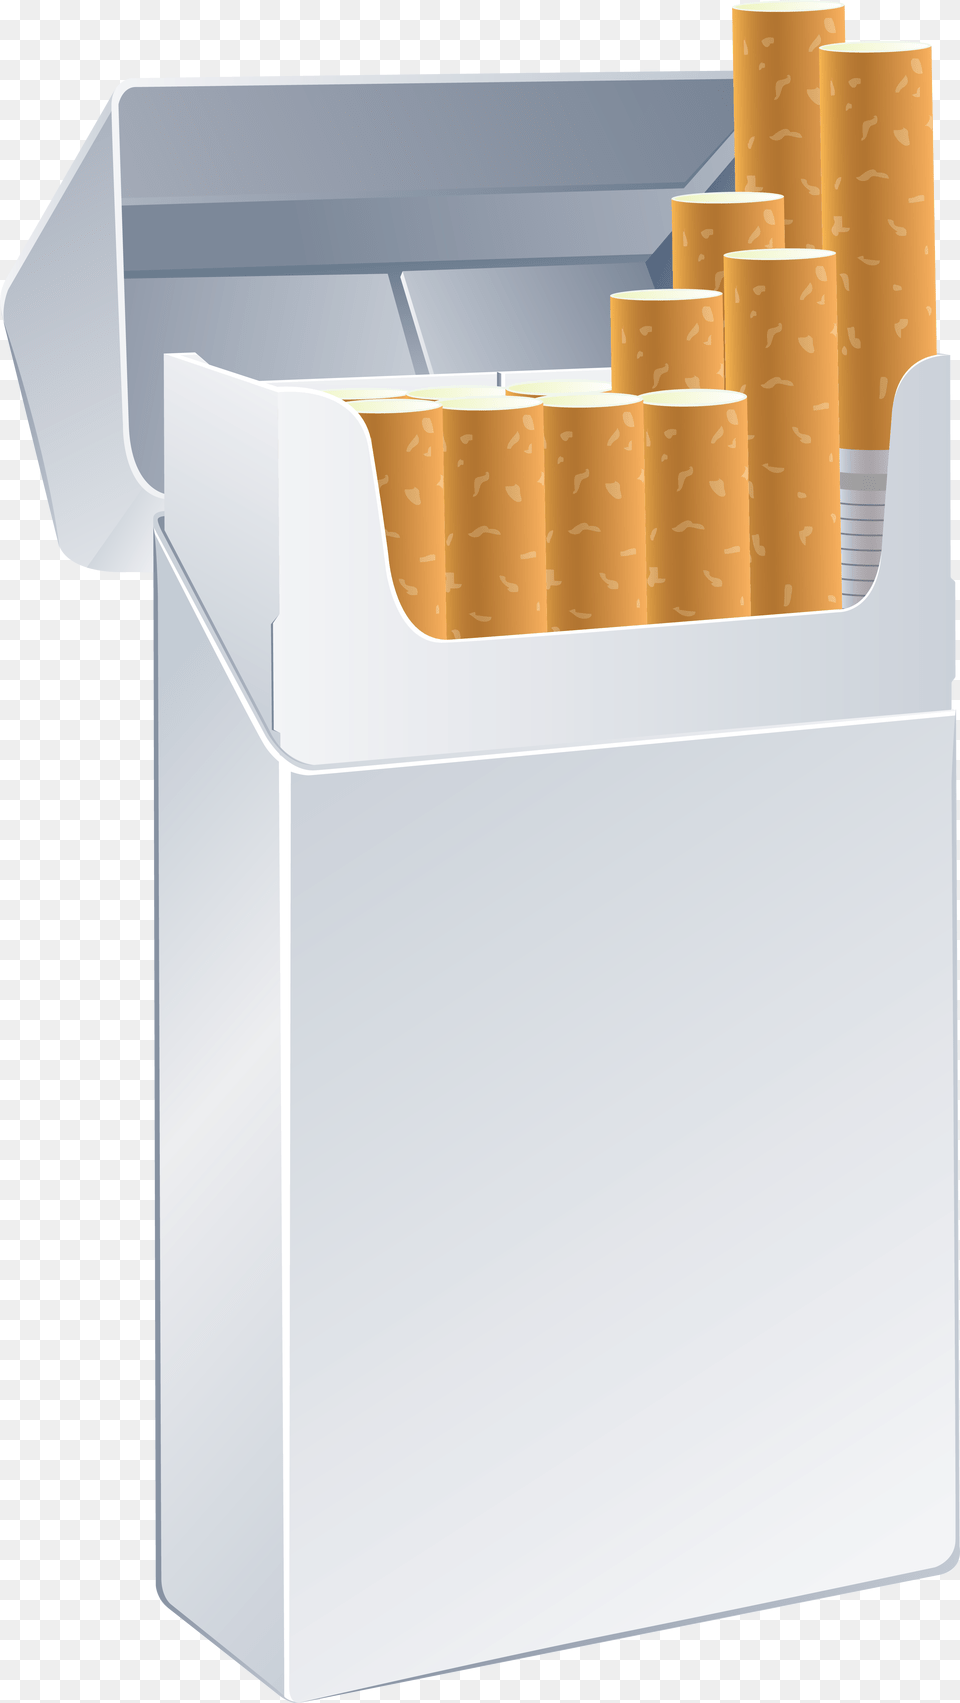 Cigarette Pack, Mailbox, Bread, Food Free Transparent Png